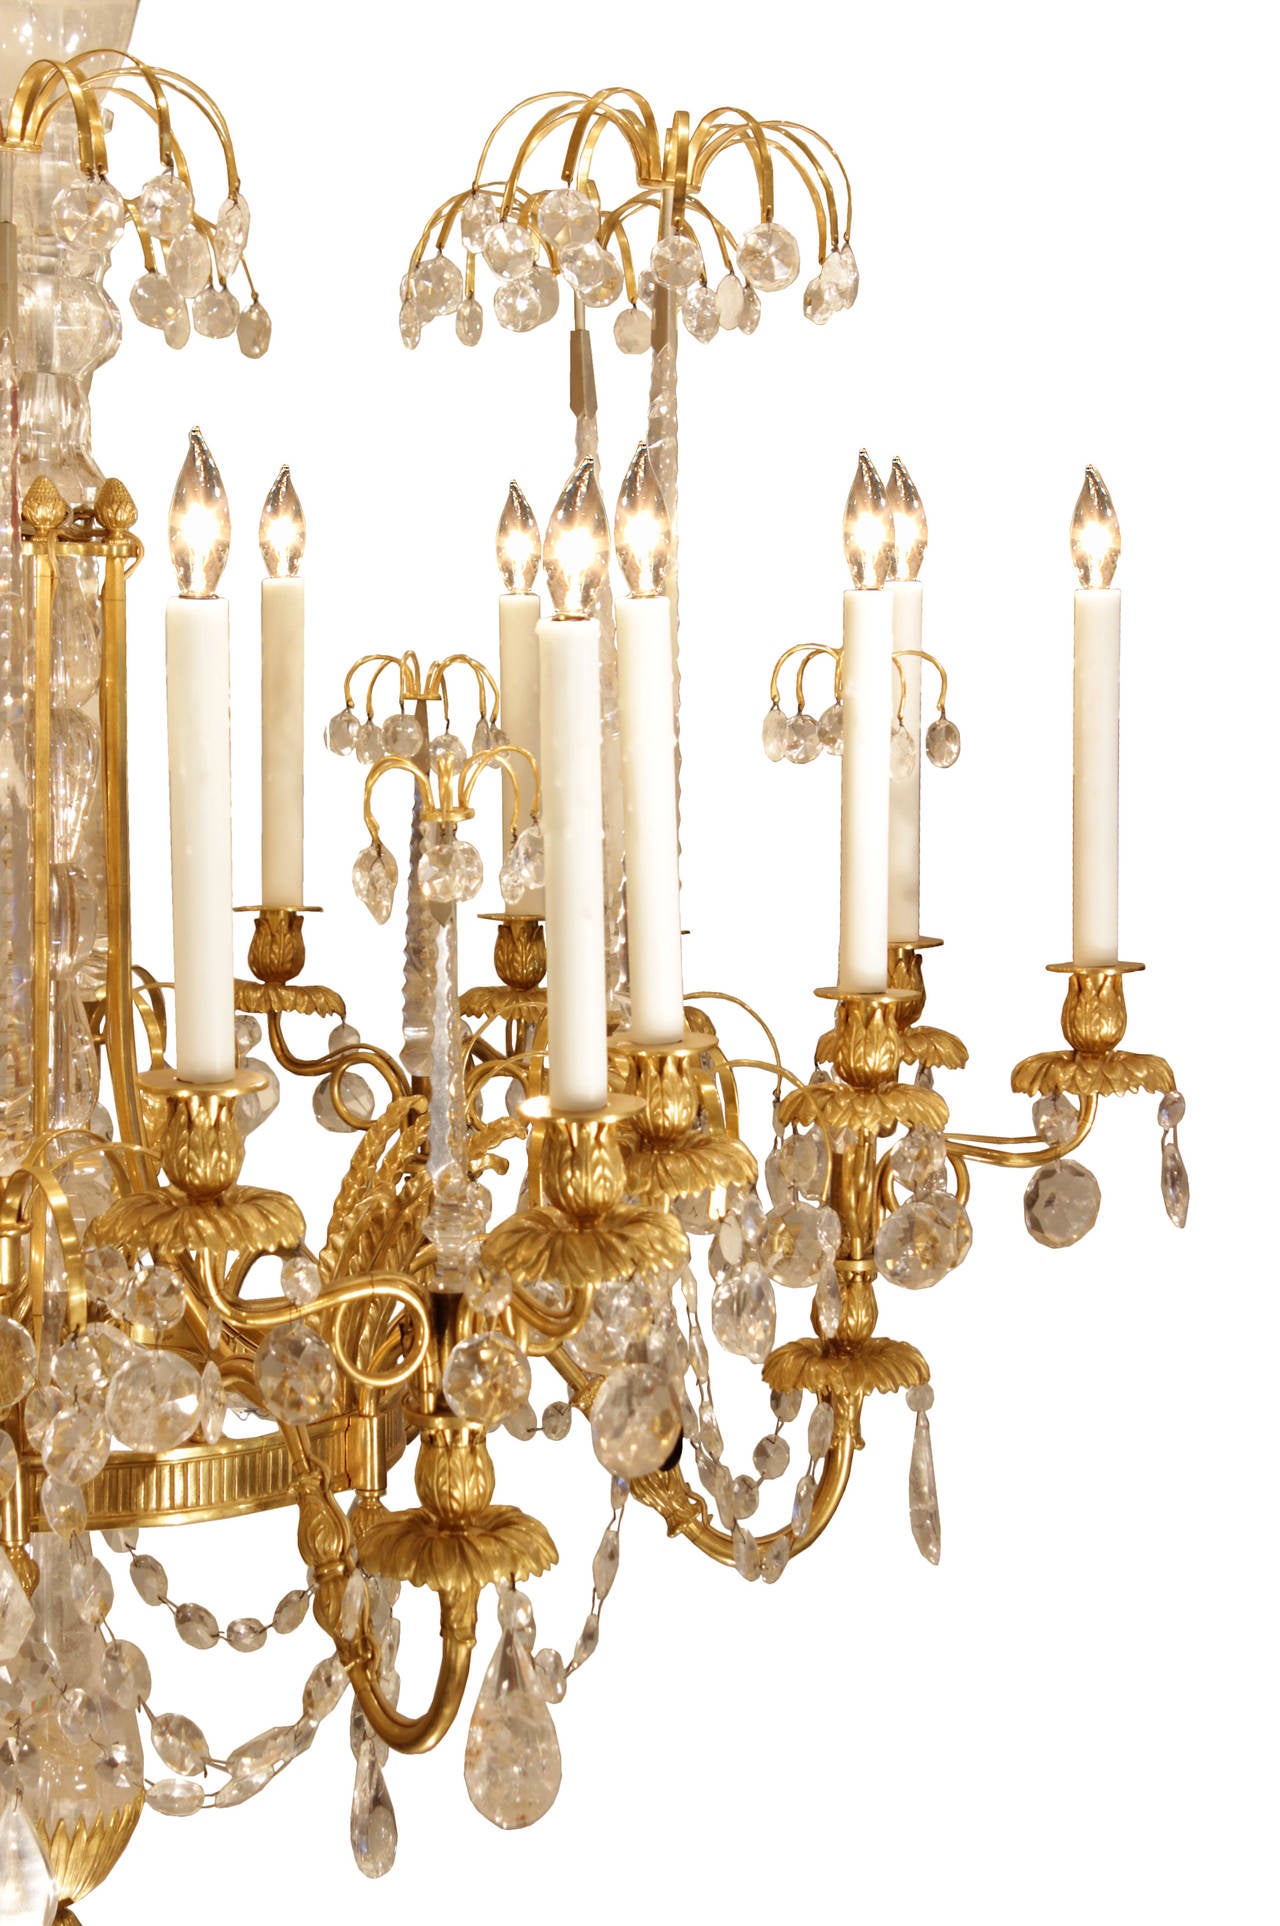 An extraordinary and spectacular Late 18th early 19th century Russian Imperial Neo-Classical st. ormolu and rock crystal chandelier, possibly attributed to Johan Zekh, one of Saint-Petersburg’s most celebrated masters. This eighteen light chandelier